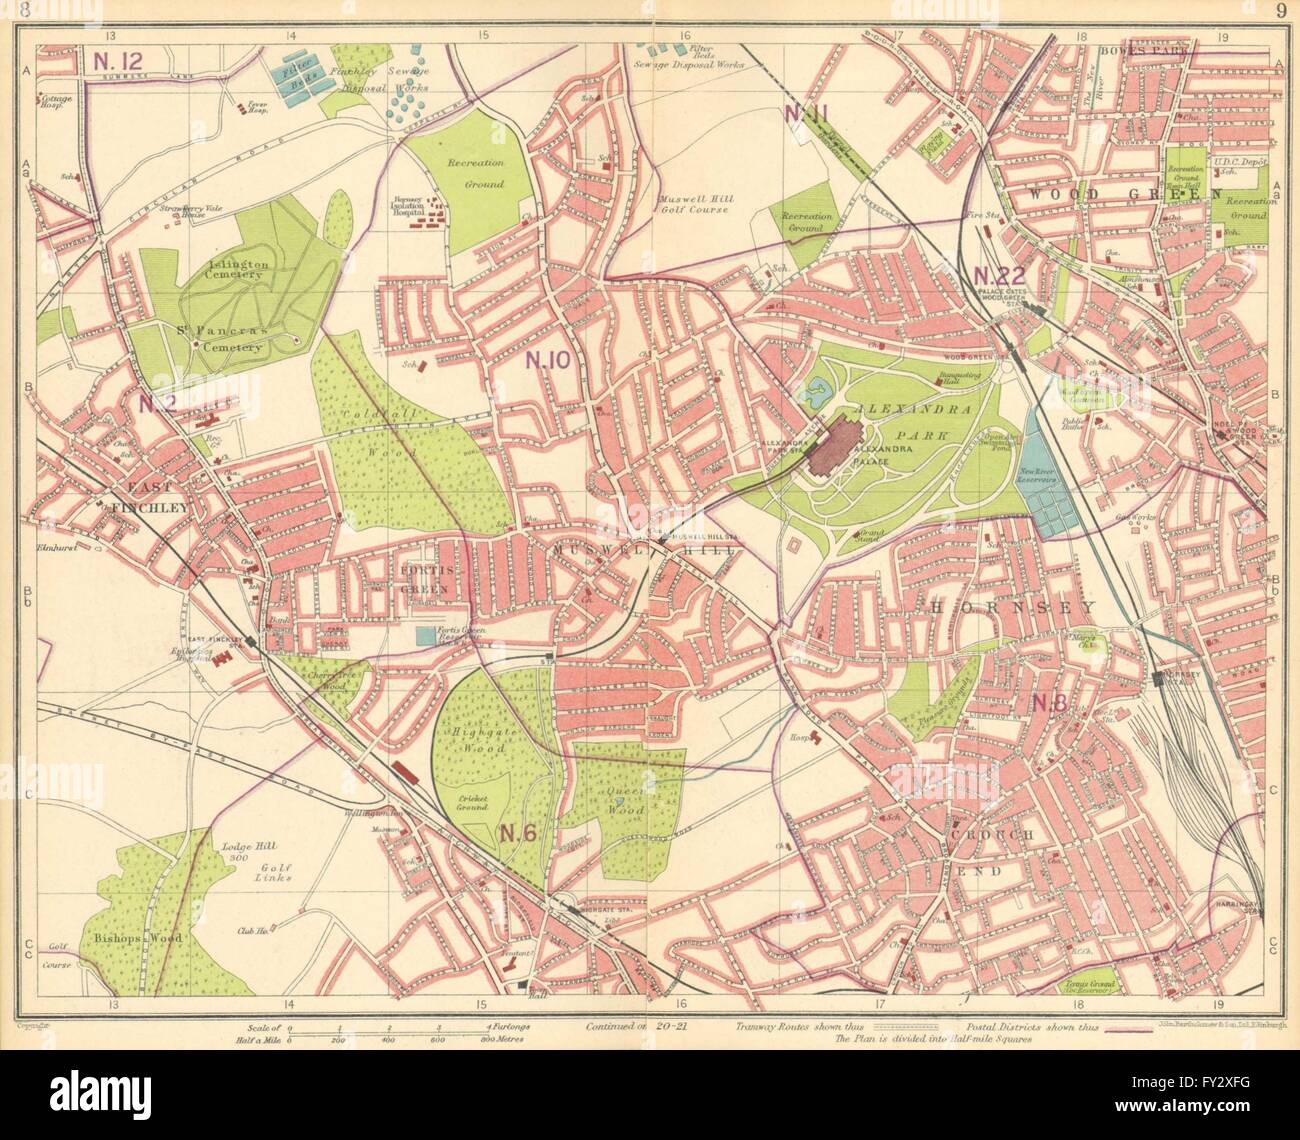 LONDON N: Muswell Hill Hornsey Wood Green Finchley Crouch End, 1930 old map Stock Photo